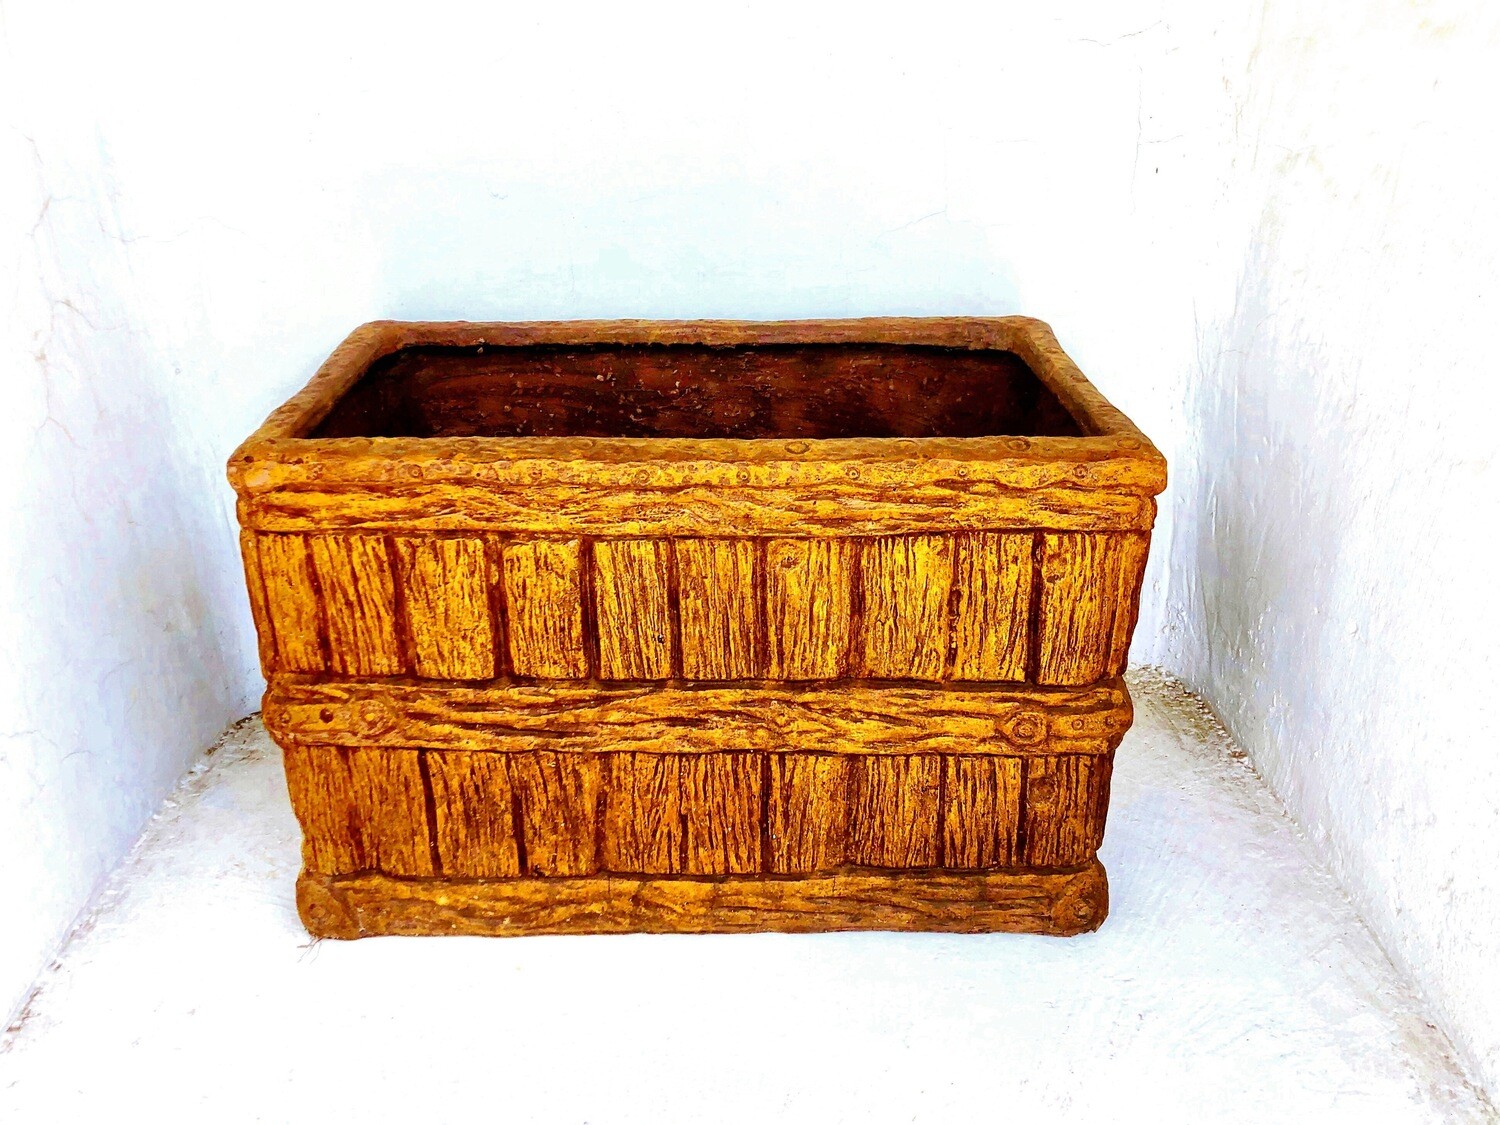 Large Crate Planter Honeyclay Finish - L850mm x W500mm x H540mm - 42kg